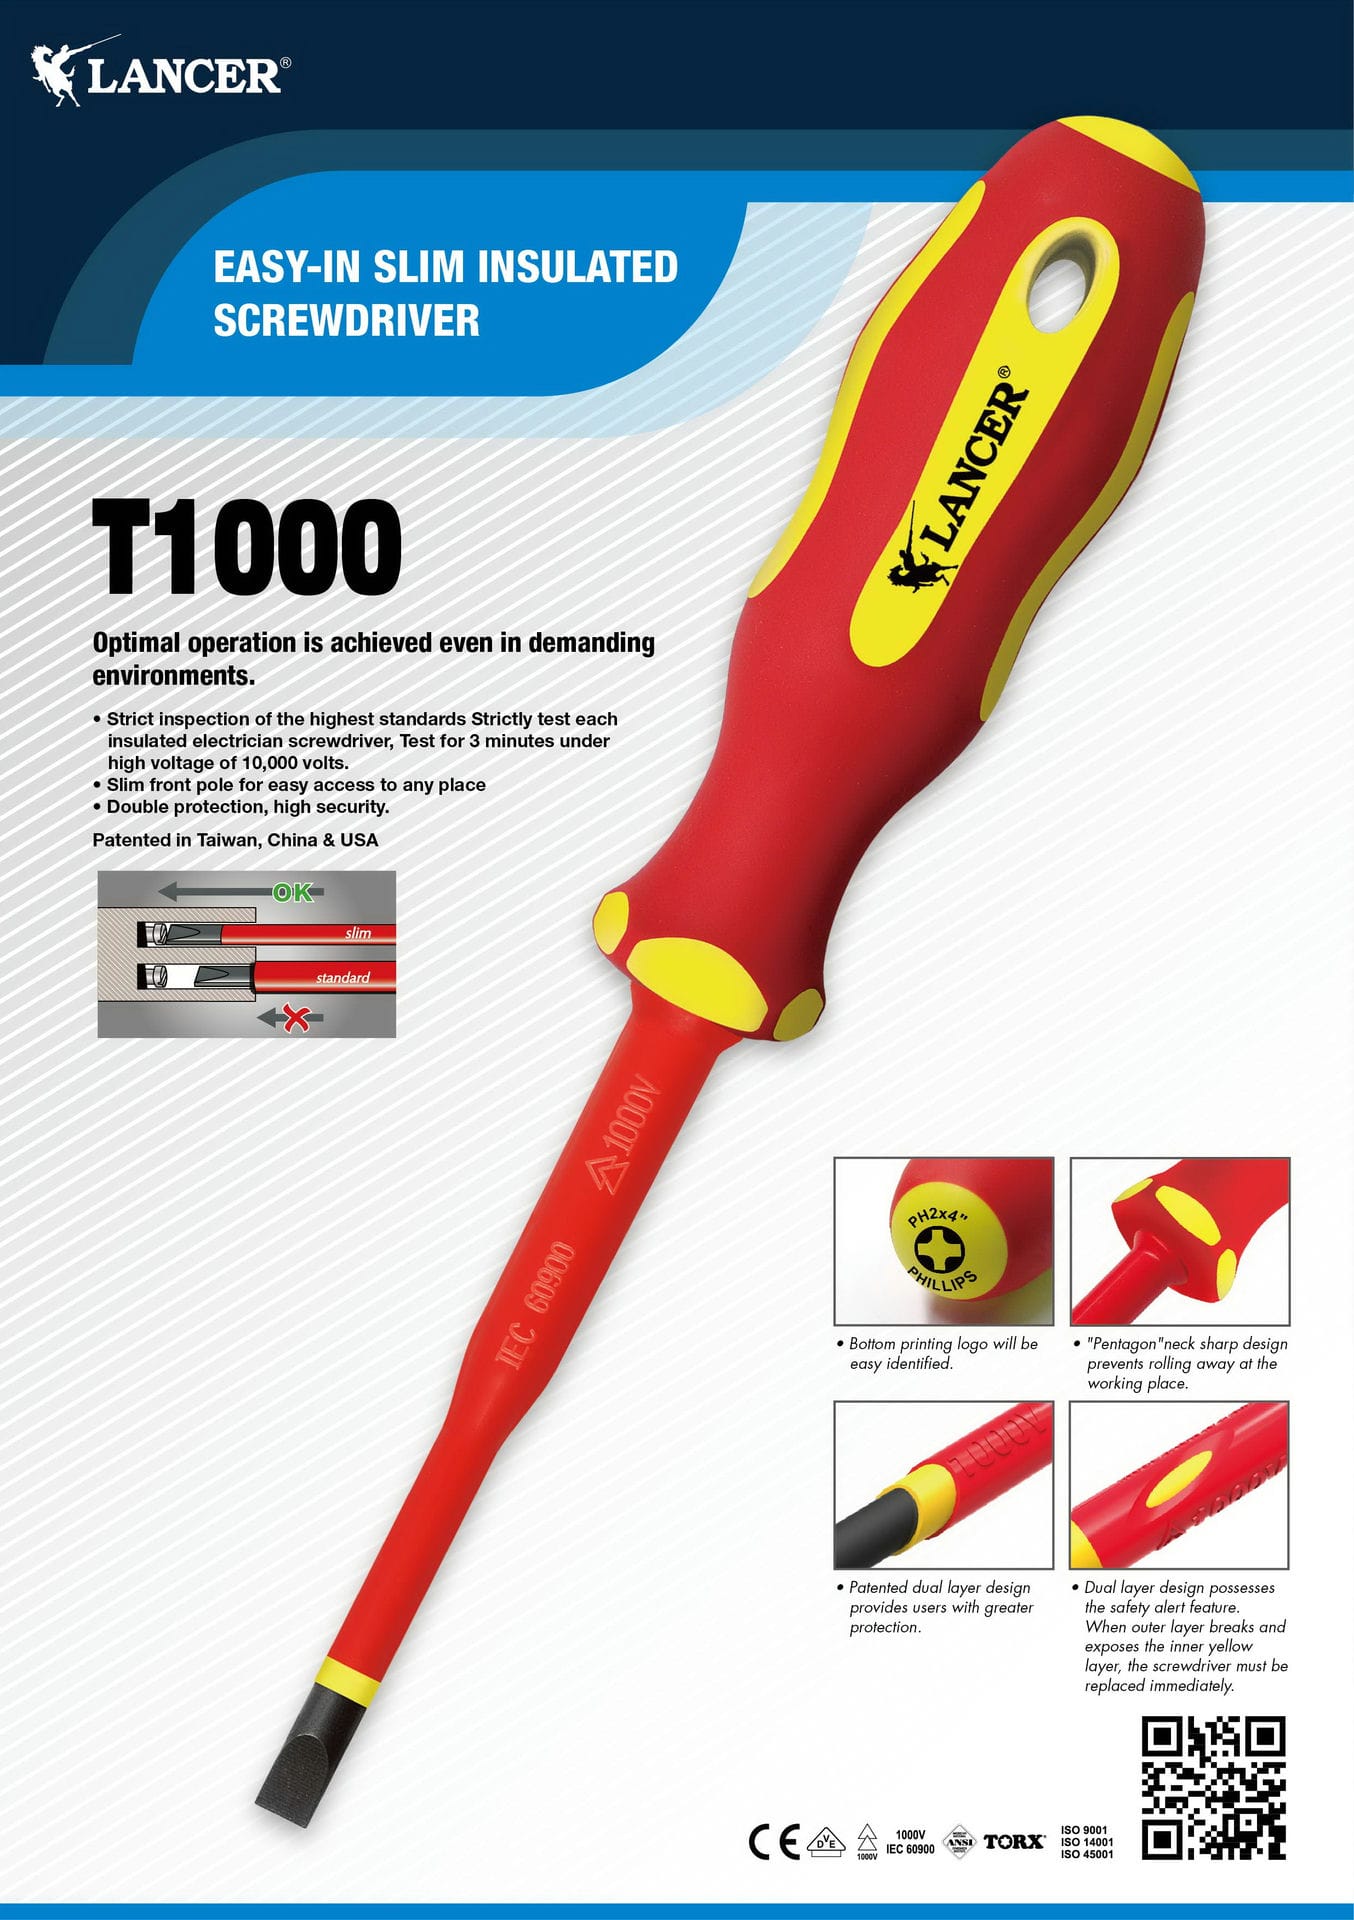 EASY-IN SLIM INSULATED  SCREWDRIVER